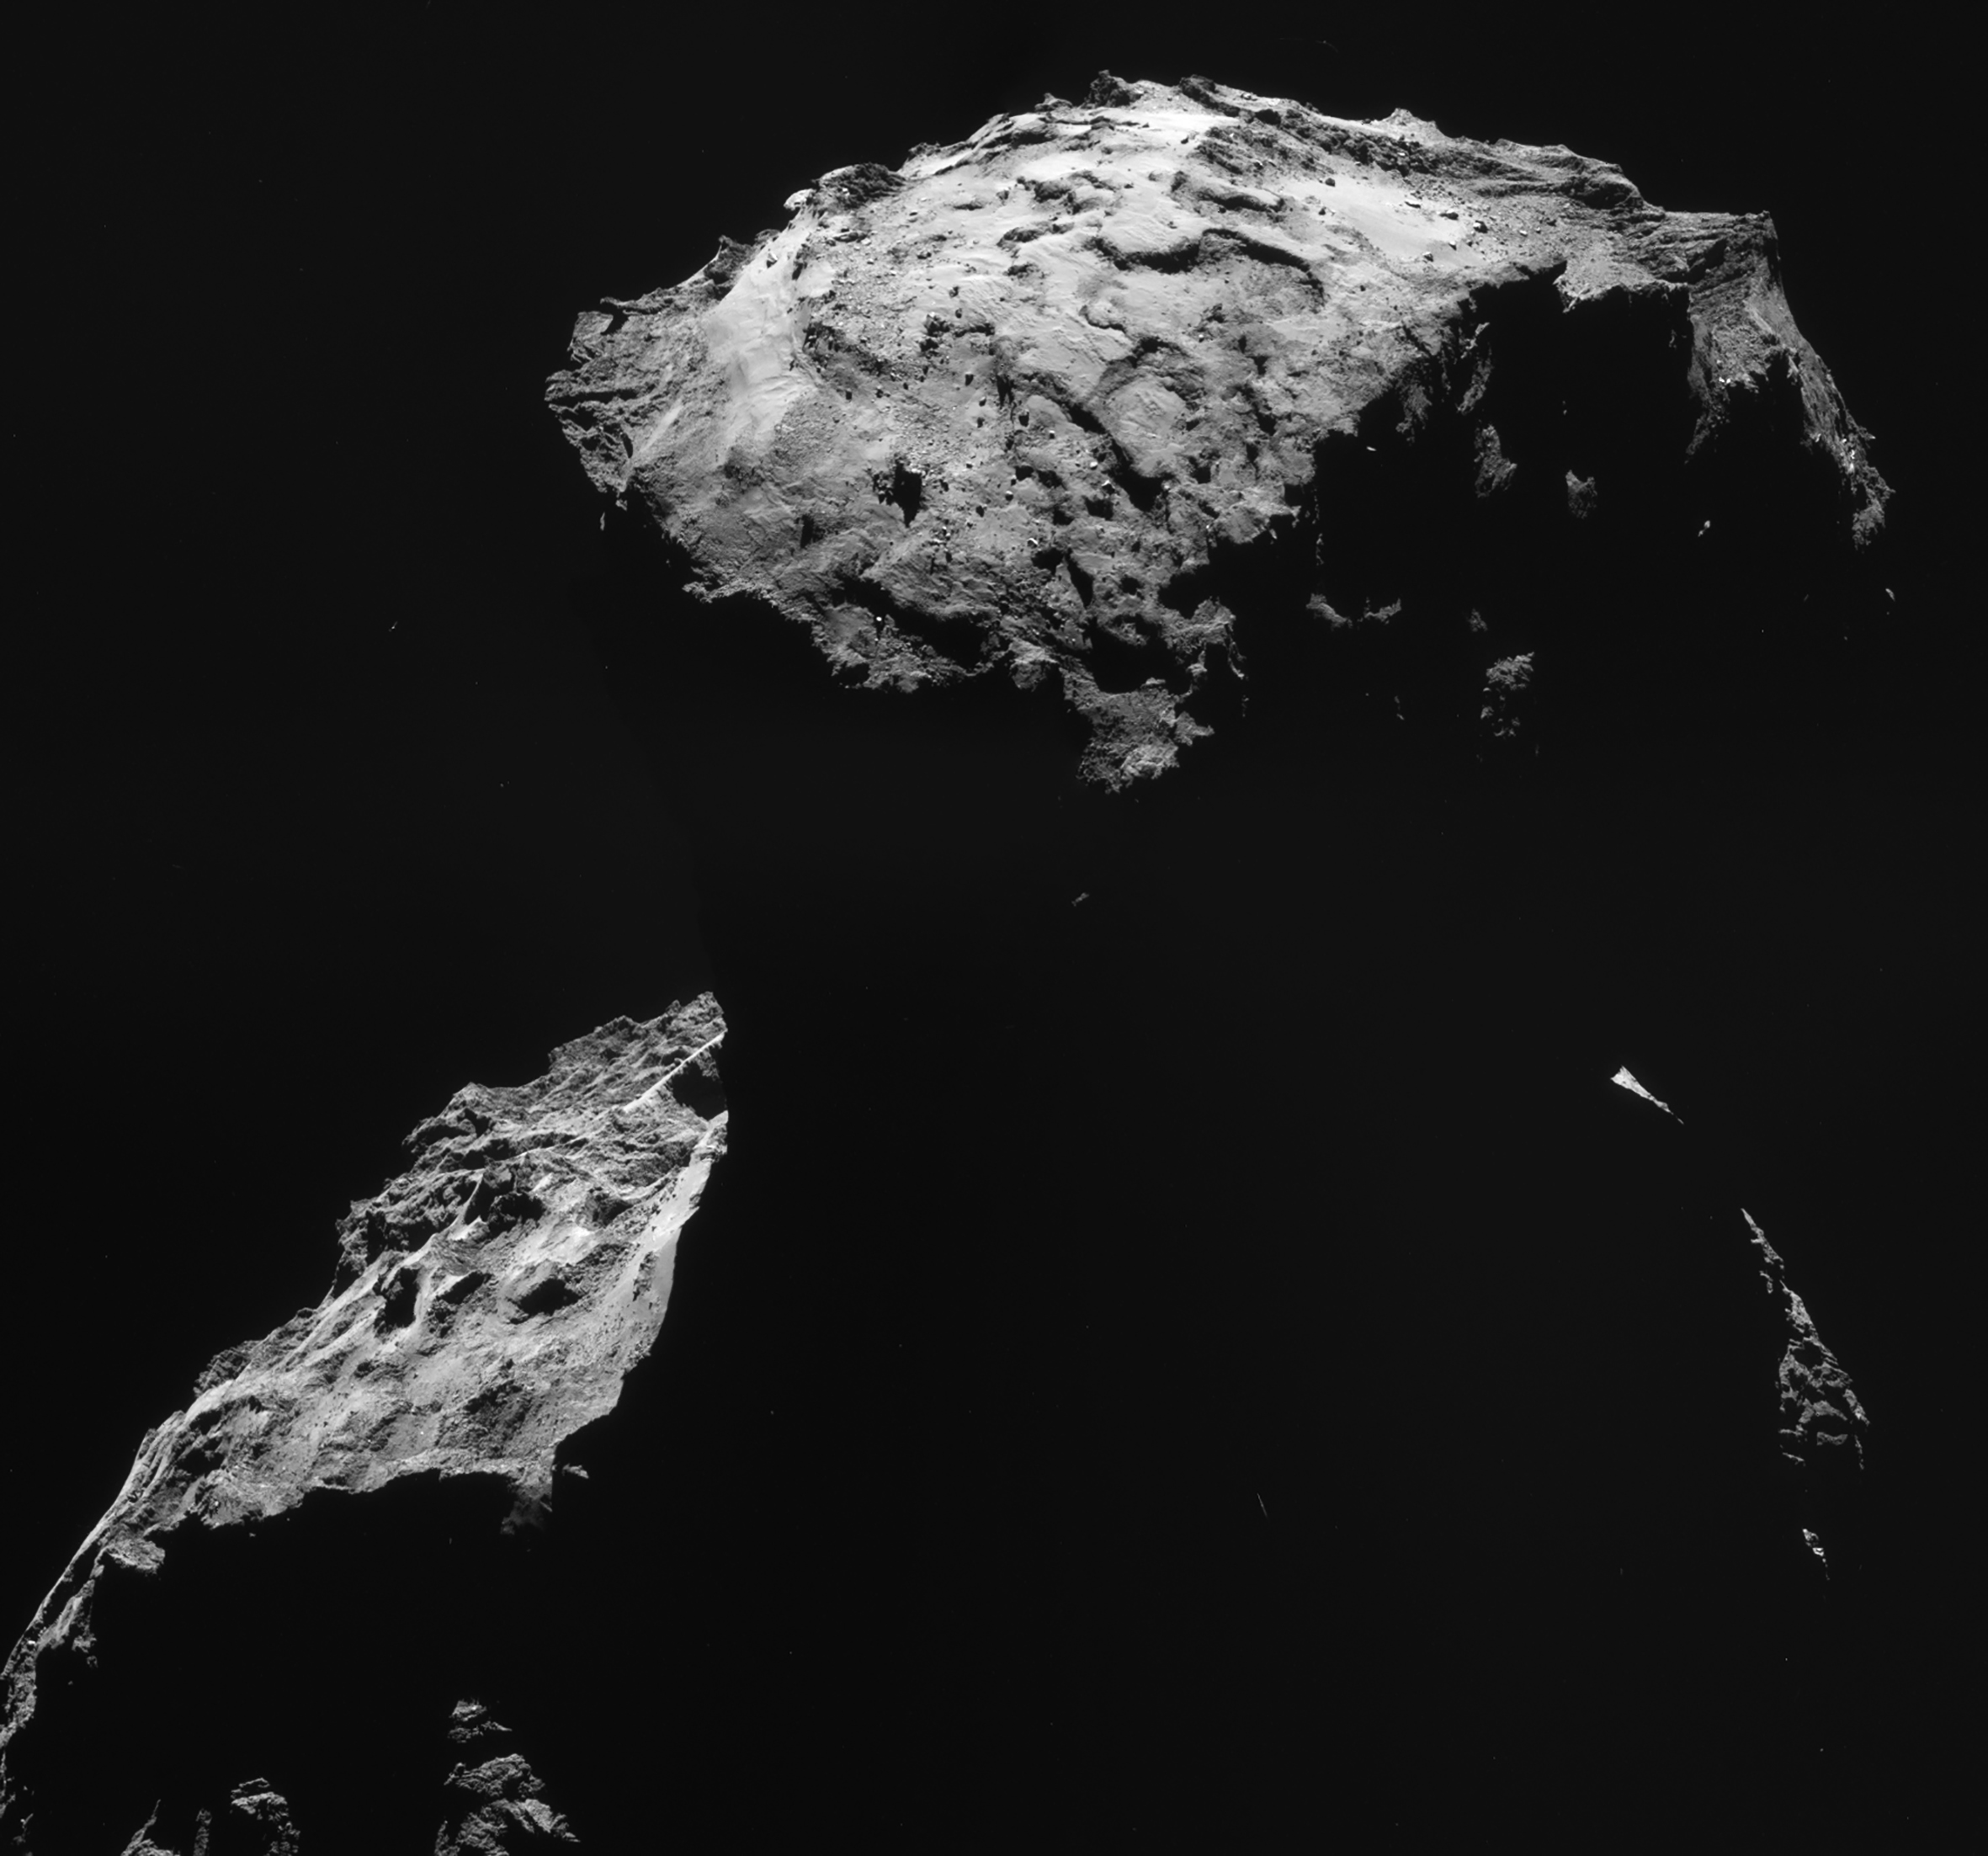 Mosaic of four images taken by the spacecraft Rosetta's navigation camera (NAVCAM) on 19 September 2014 at 28.6 km (17.8 mi) from the centre of comet 67P/Churymov-Gerasimenko. Copyright: European Space Agency